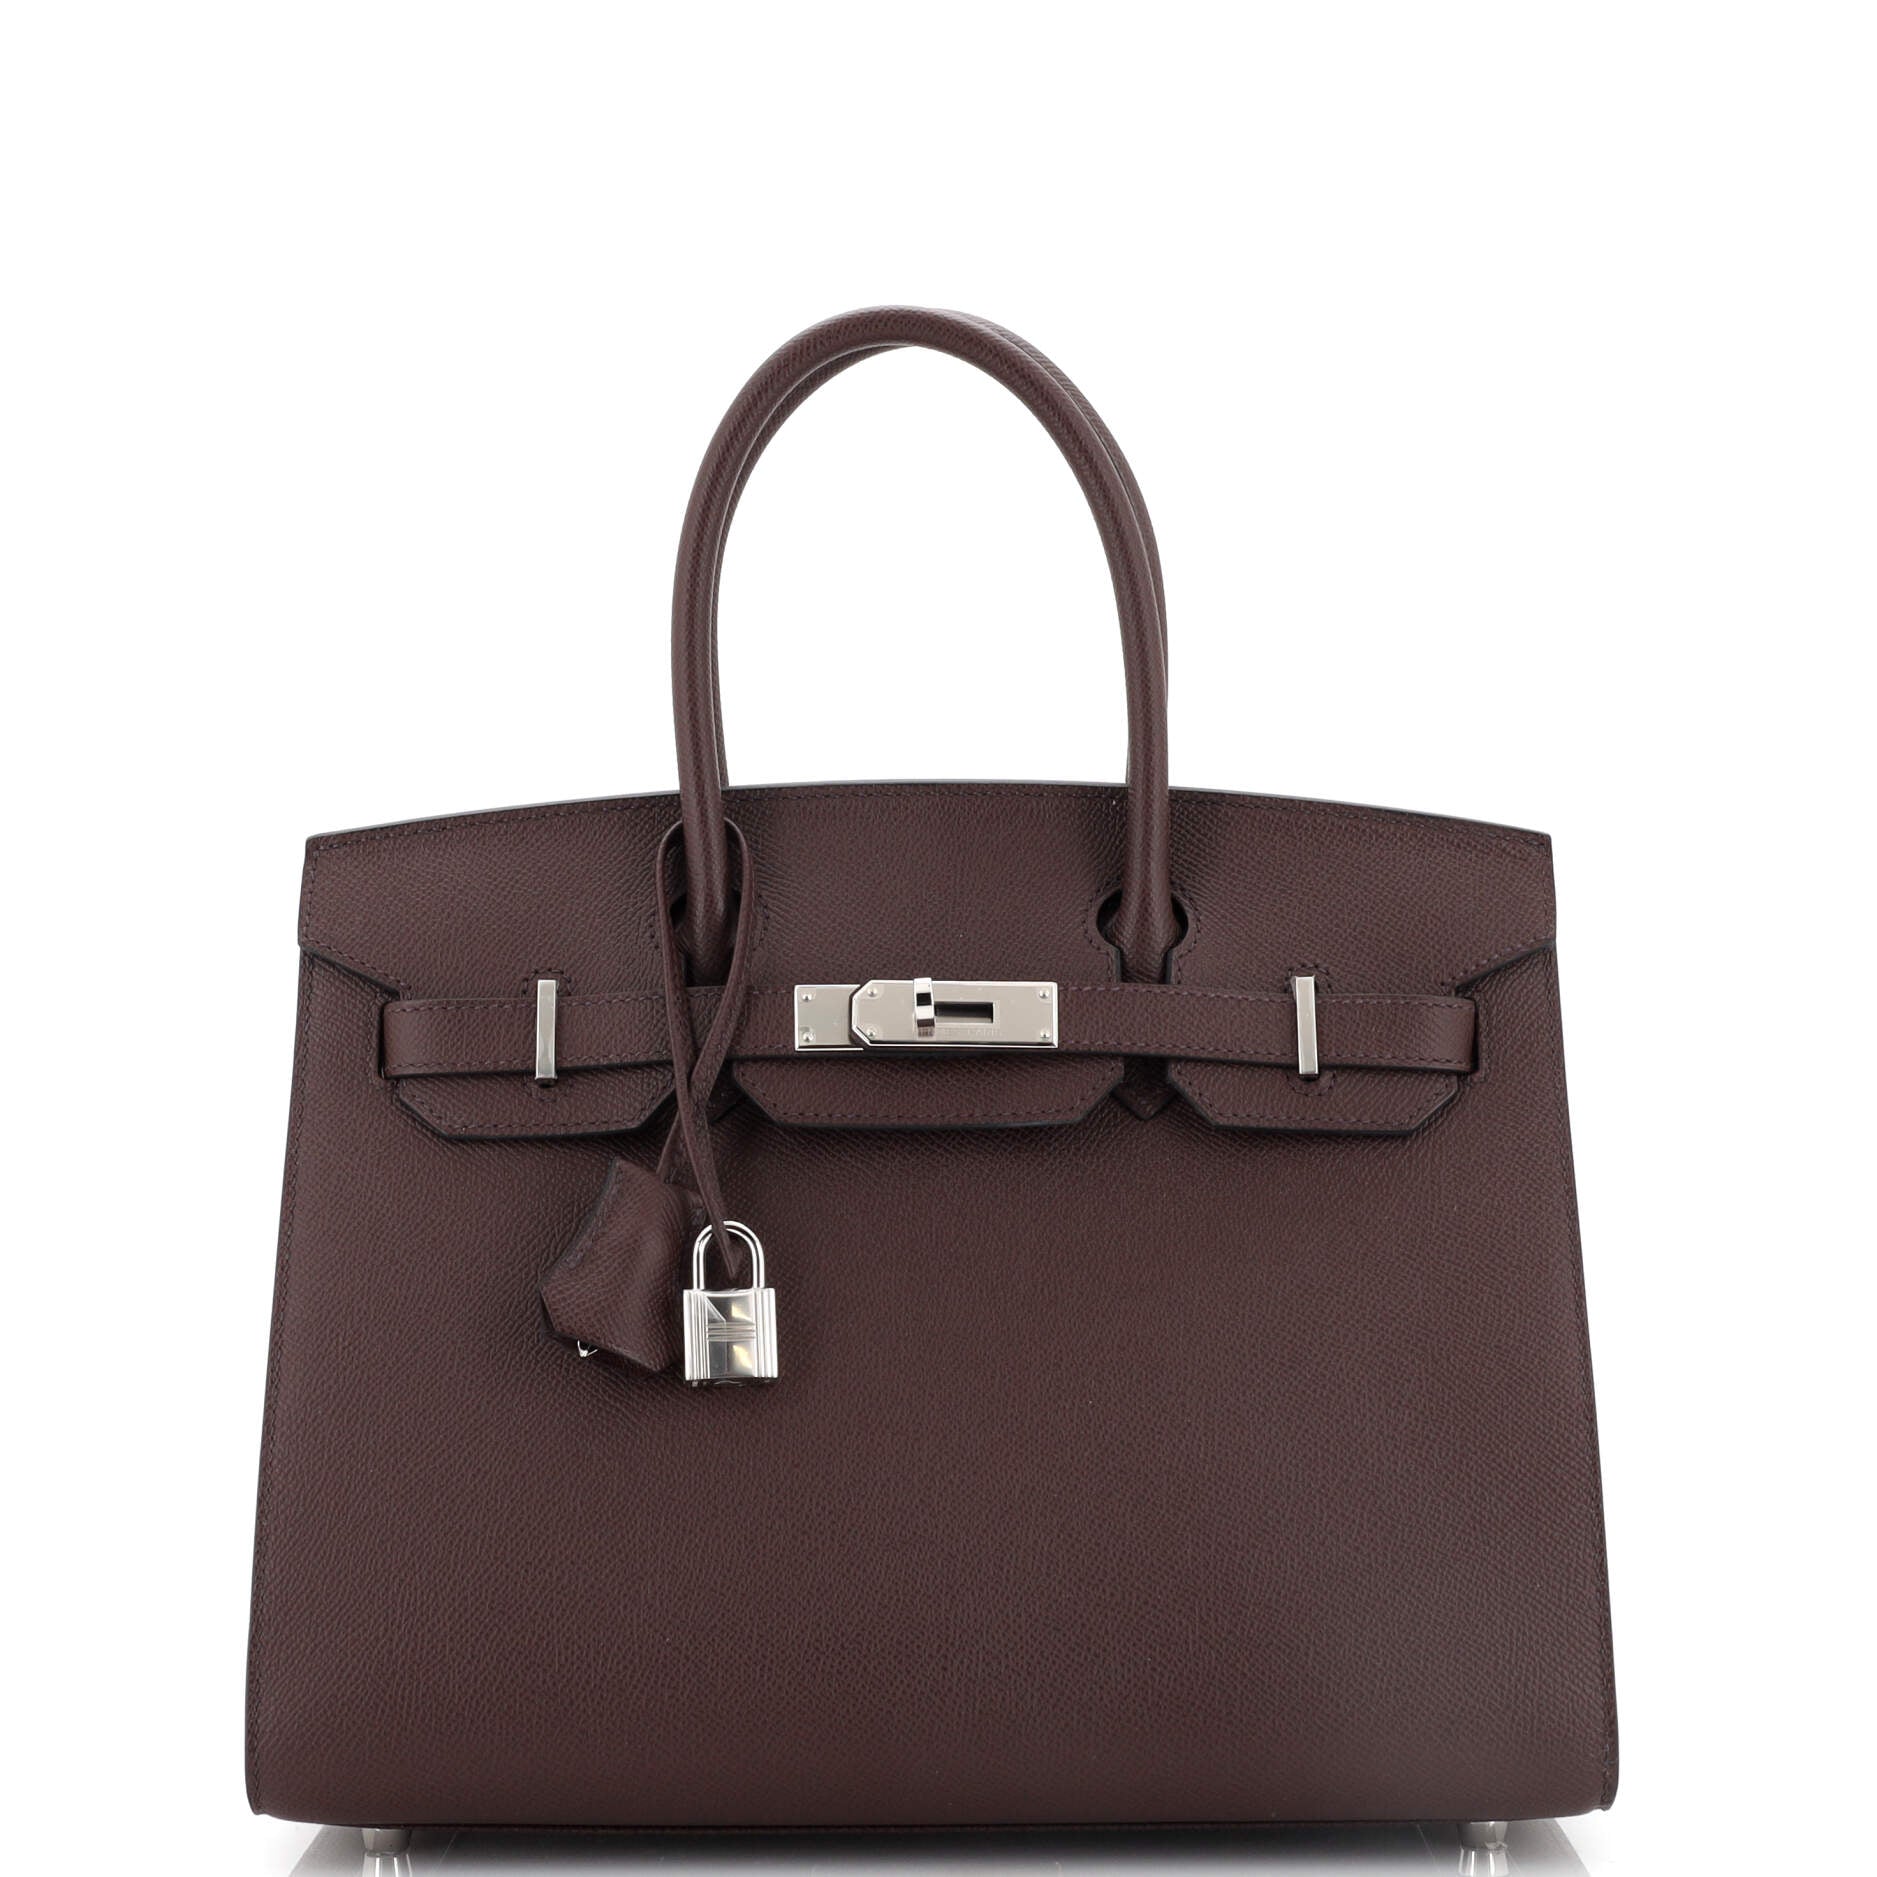 hermes rouge sellier color